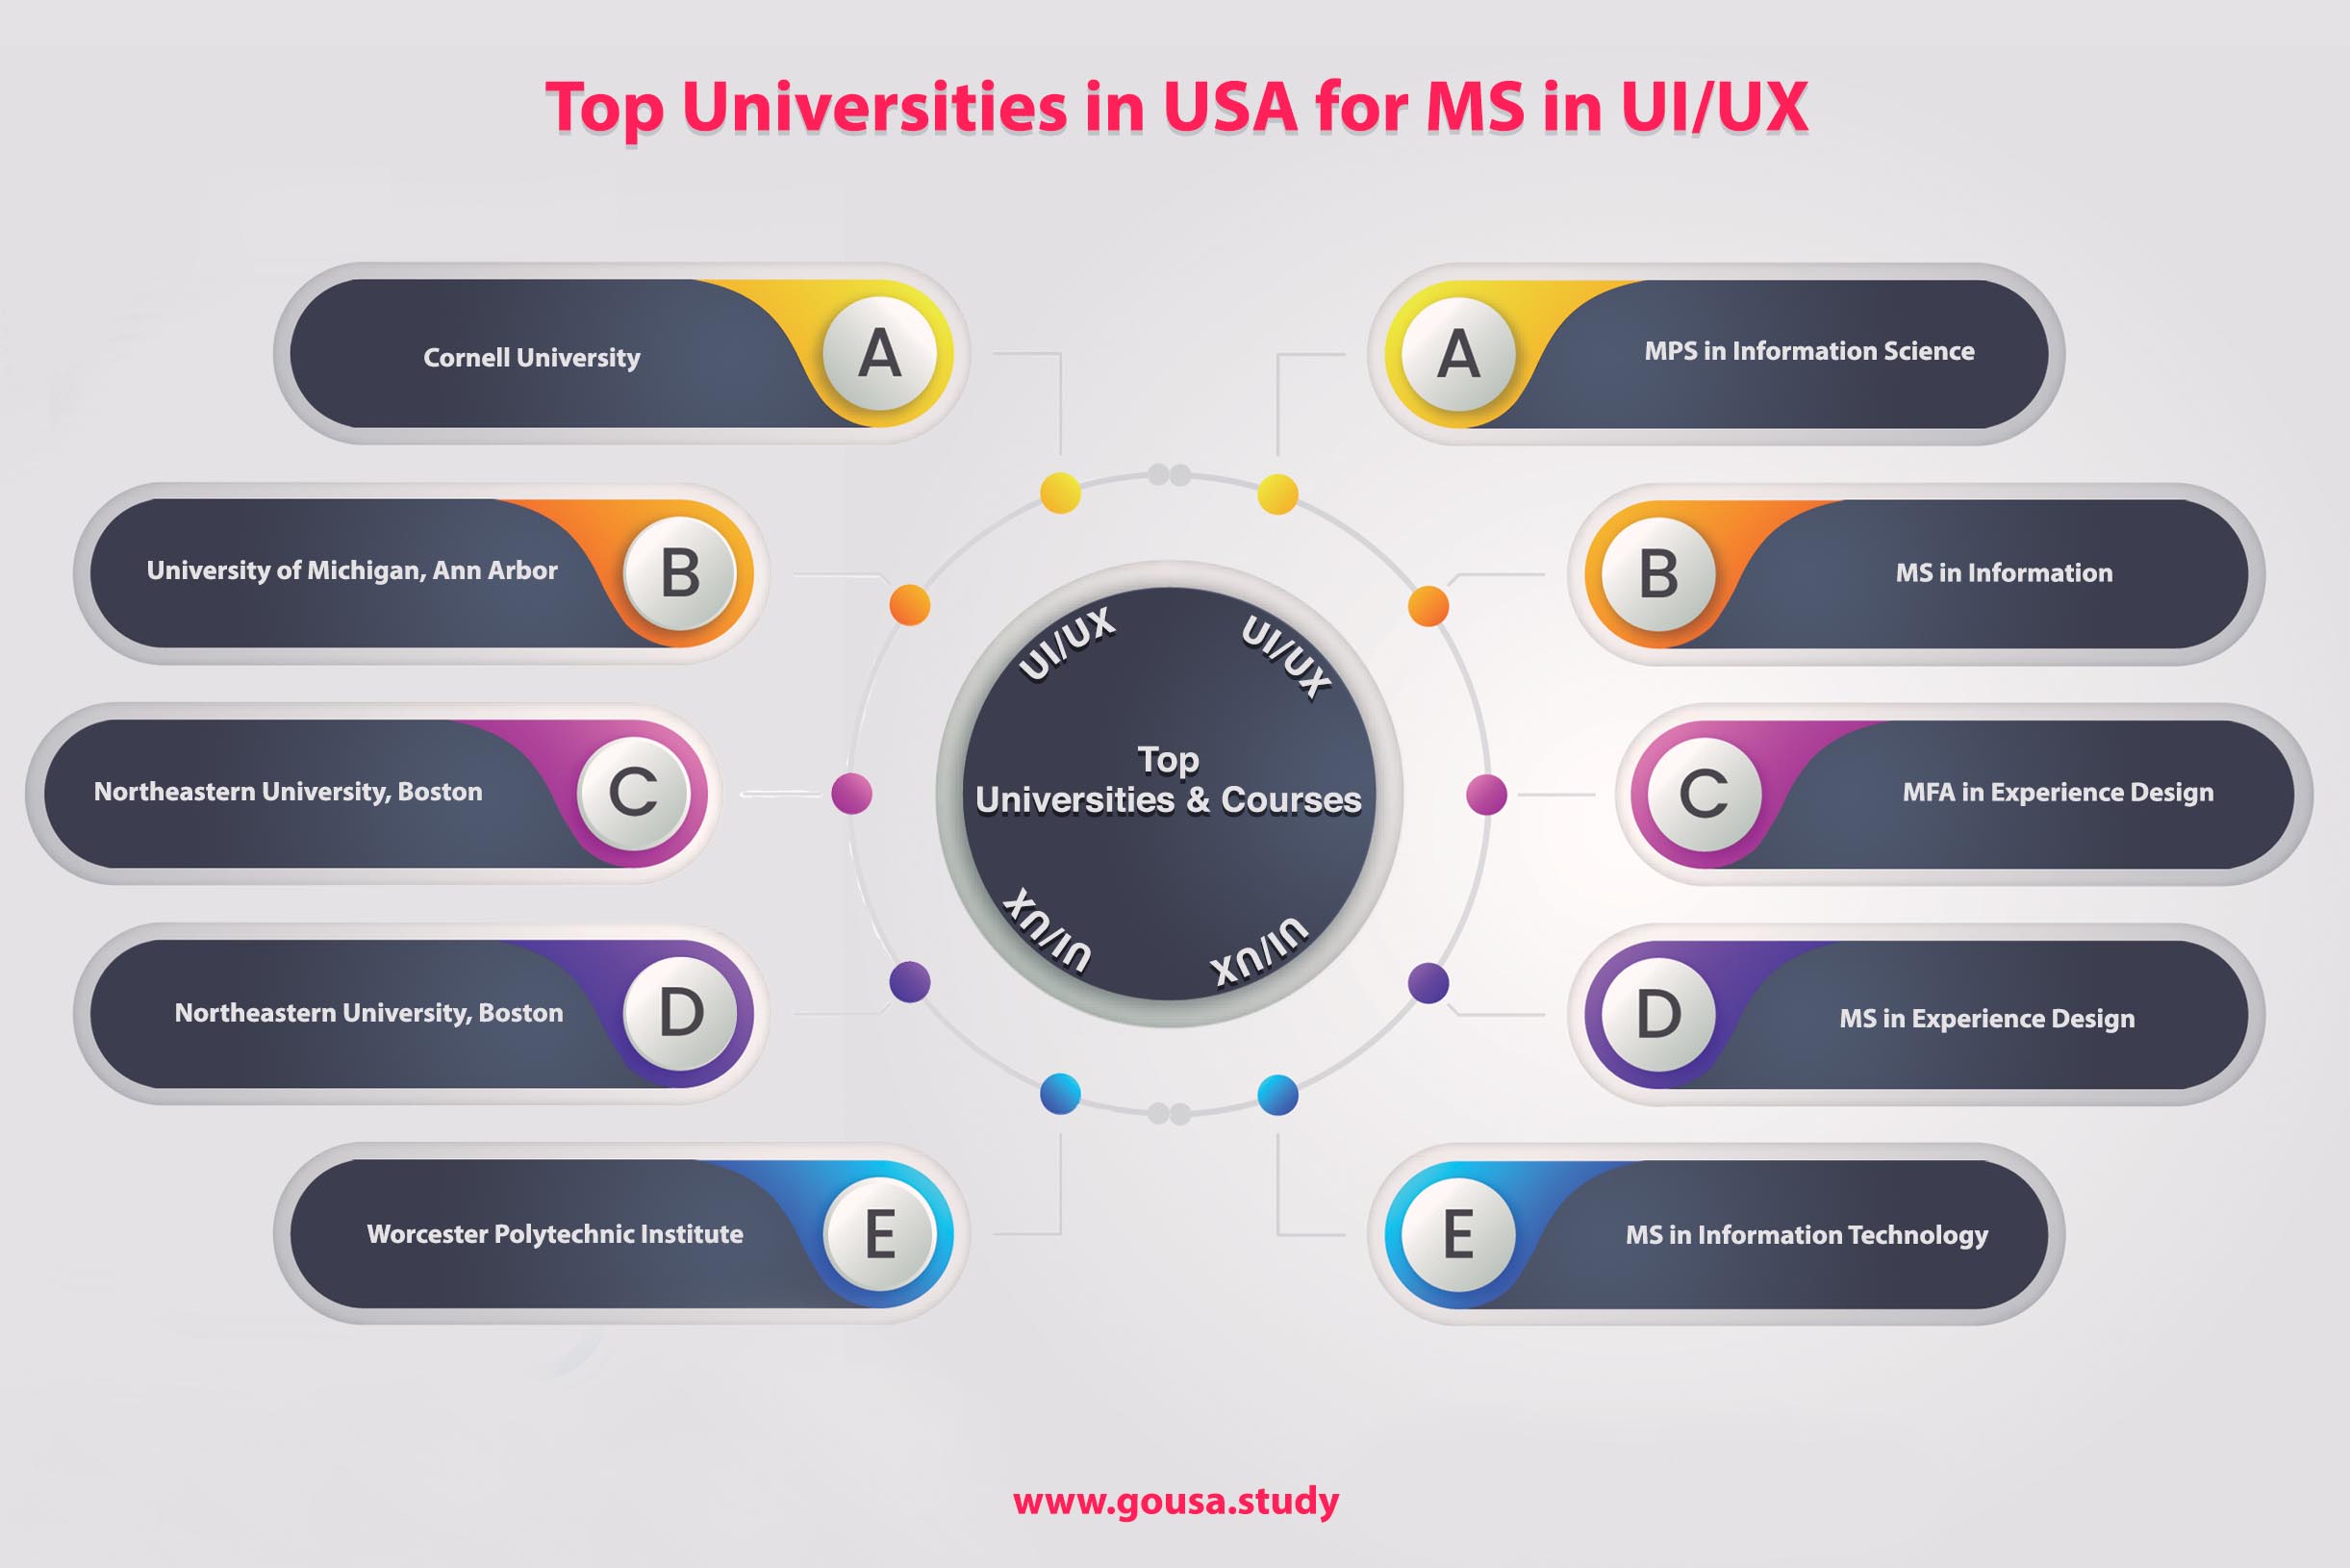 Top Universities in USA for MS in UI/UX